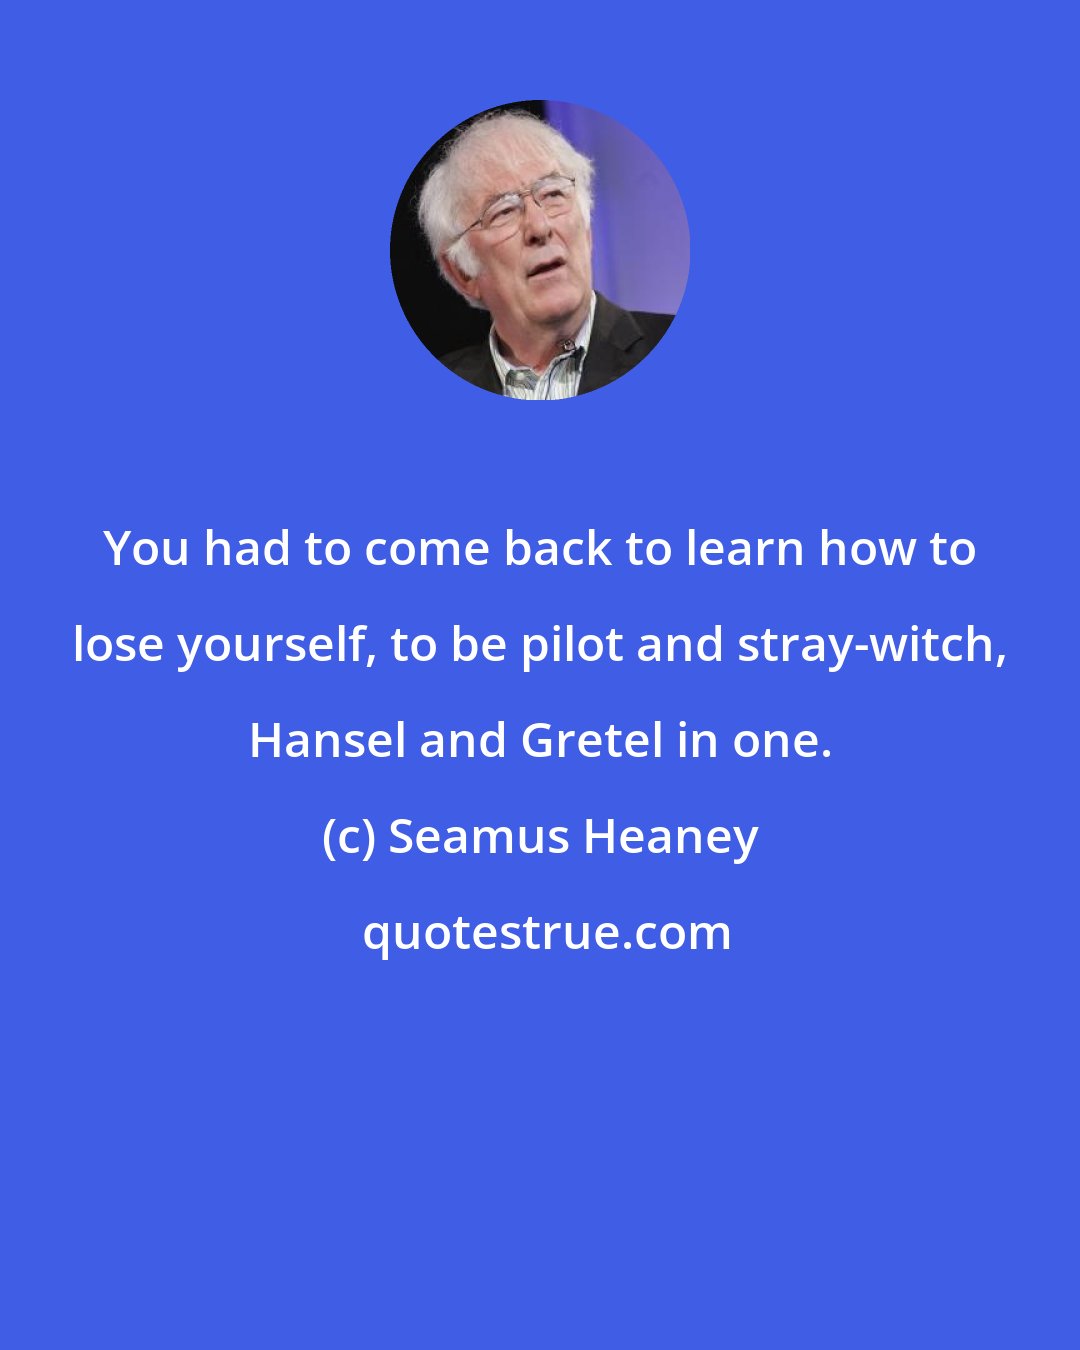 Seamus Heaney: You had to come back to learn how to lose yourself, to be pilot and stray-witch, Hansel and Gretel in one.